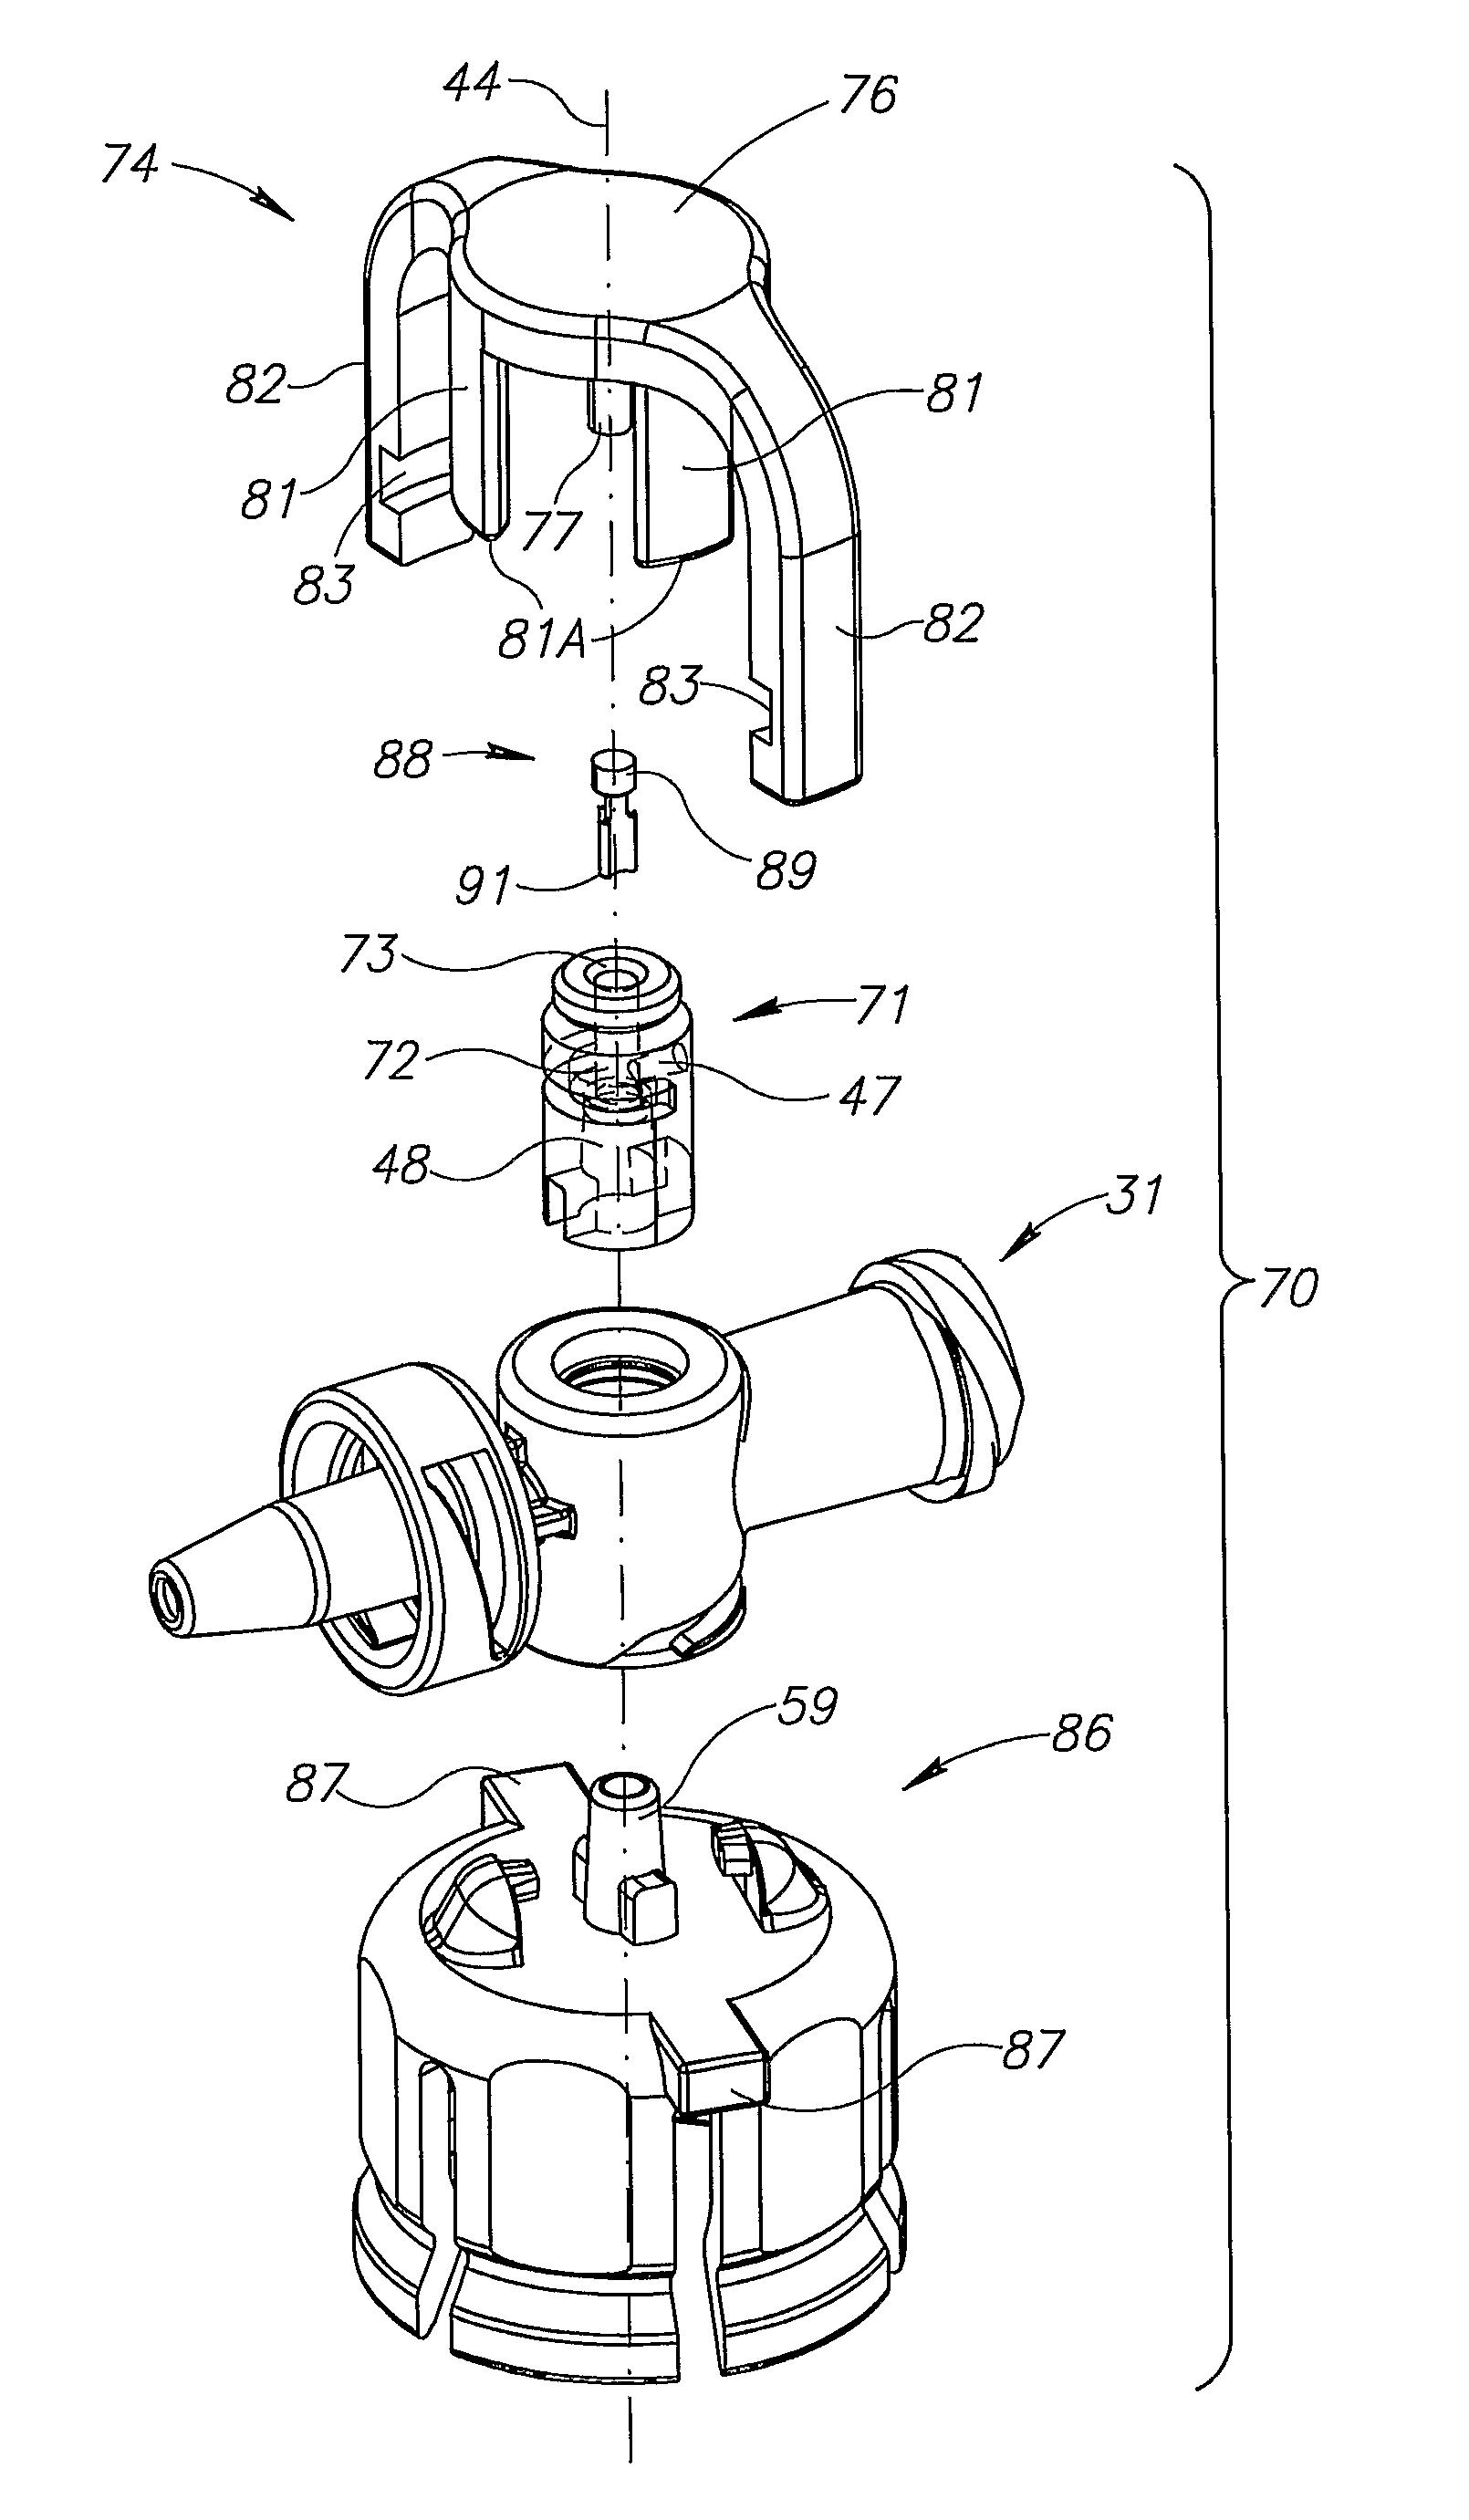 Fluid control device with manually depressed actuator